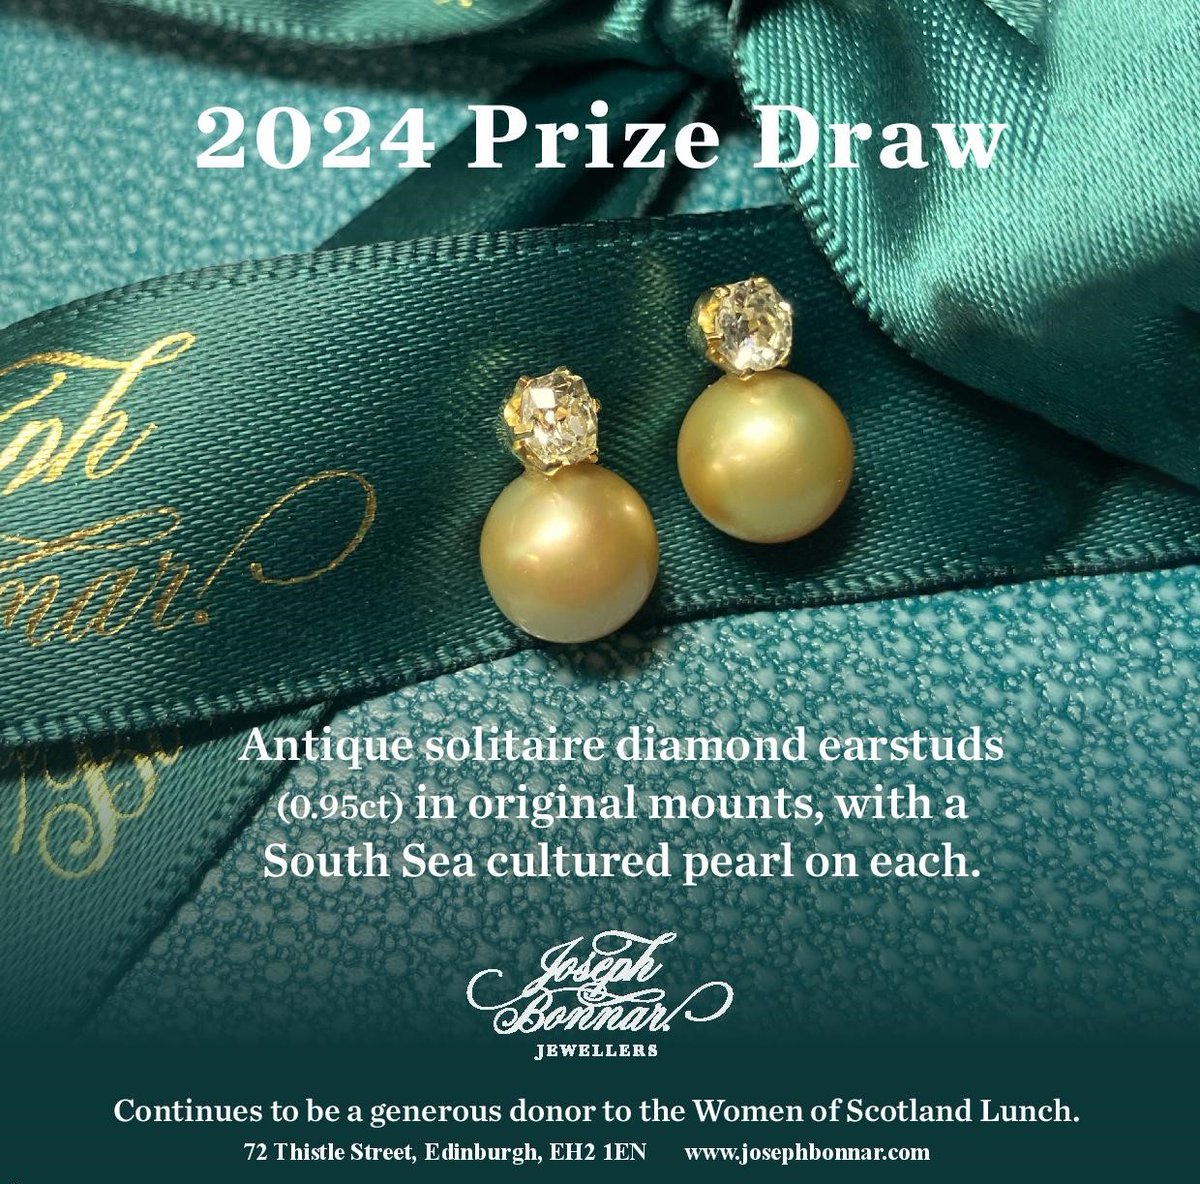 Our star prize in our prize draw is this beautiful antique solitaire diamond ear studs in original mounts with a South Sea cultured pearl on each, kindly donated by Joseph Bonnar Jewellers from Edinburgh. wosl.co.uk/lunches/women-… or at the lunch. @EndometriosisUK